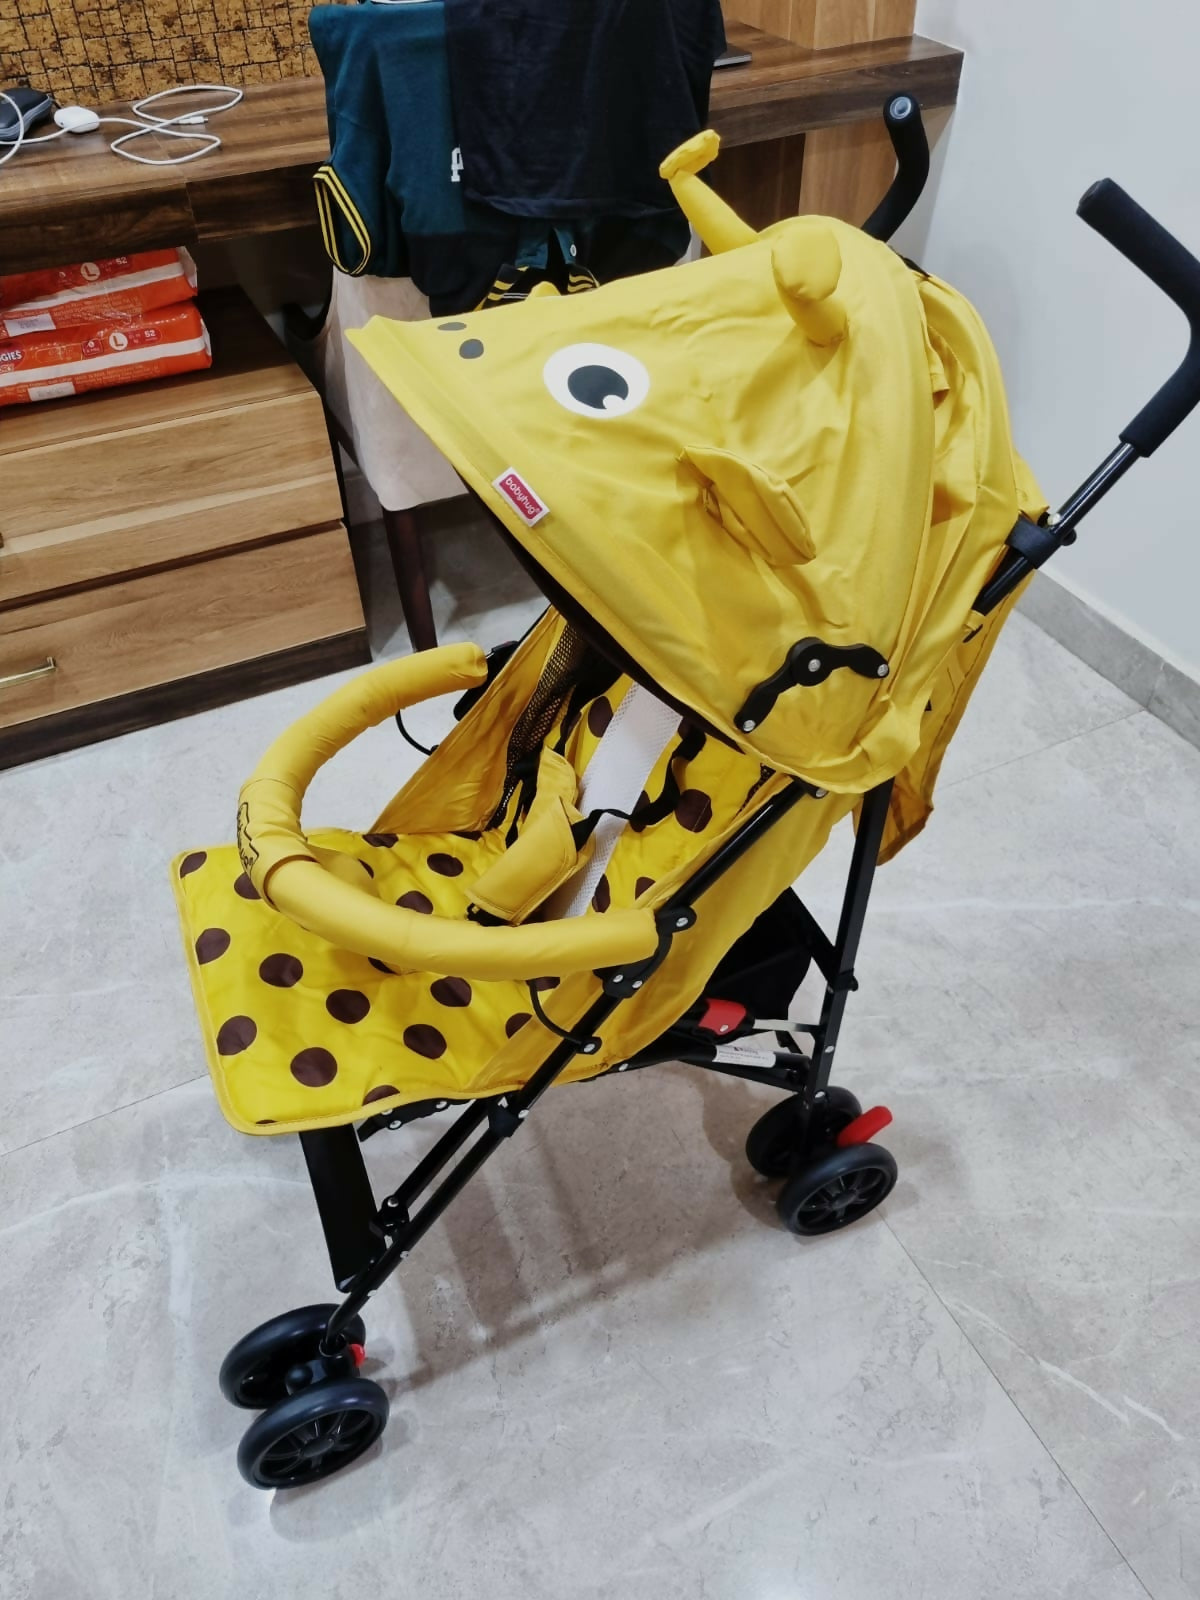 Explore the world in style with the BABYHUG Lil Giraffe Baby Stroller/Pram, offering comfort, convenience, and adorable design for your little explorer.